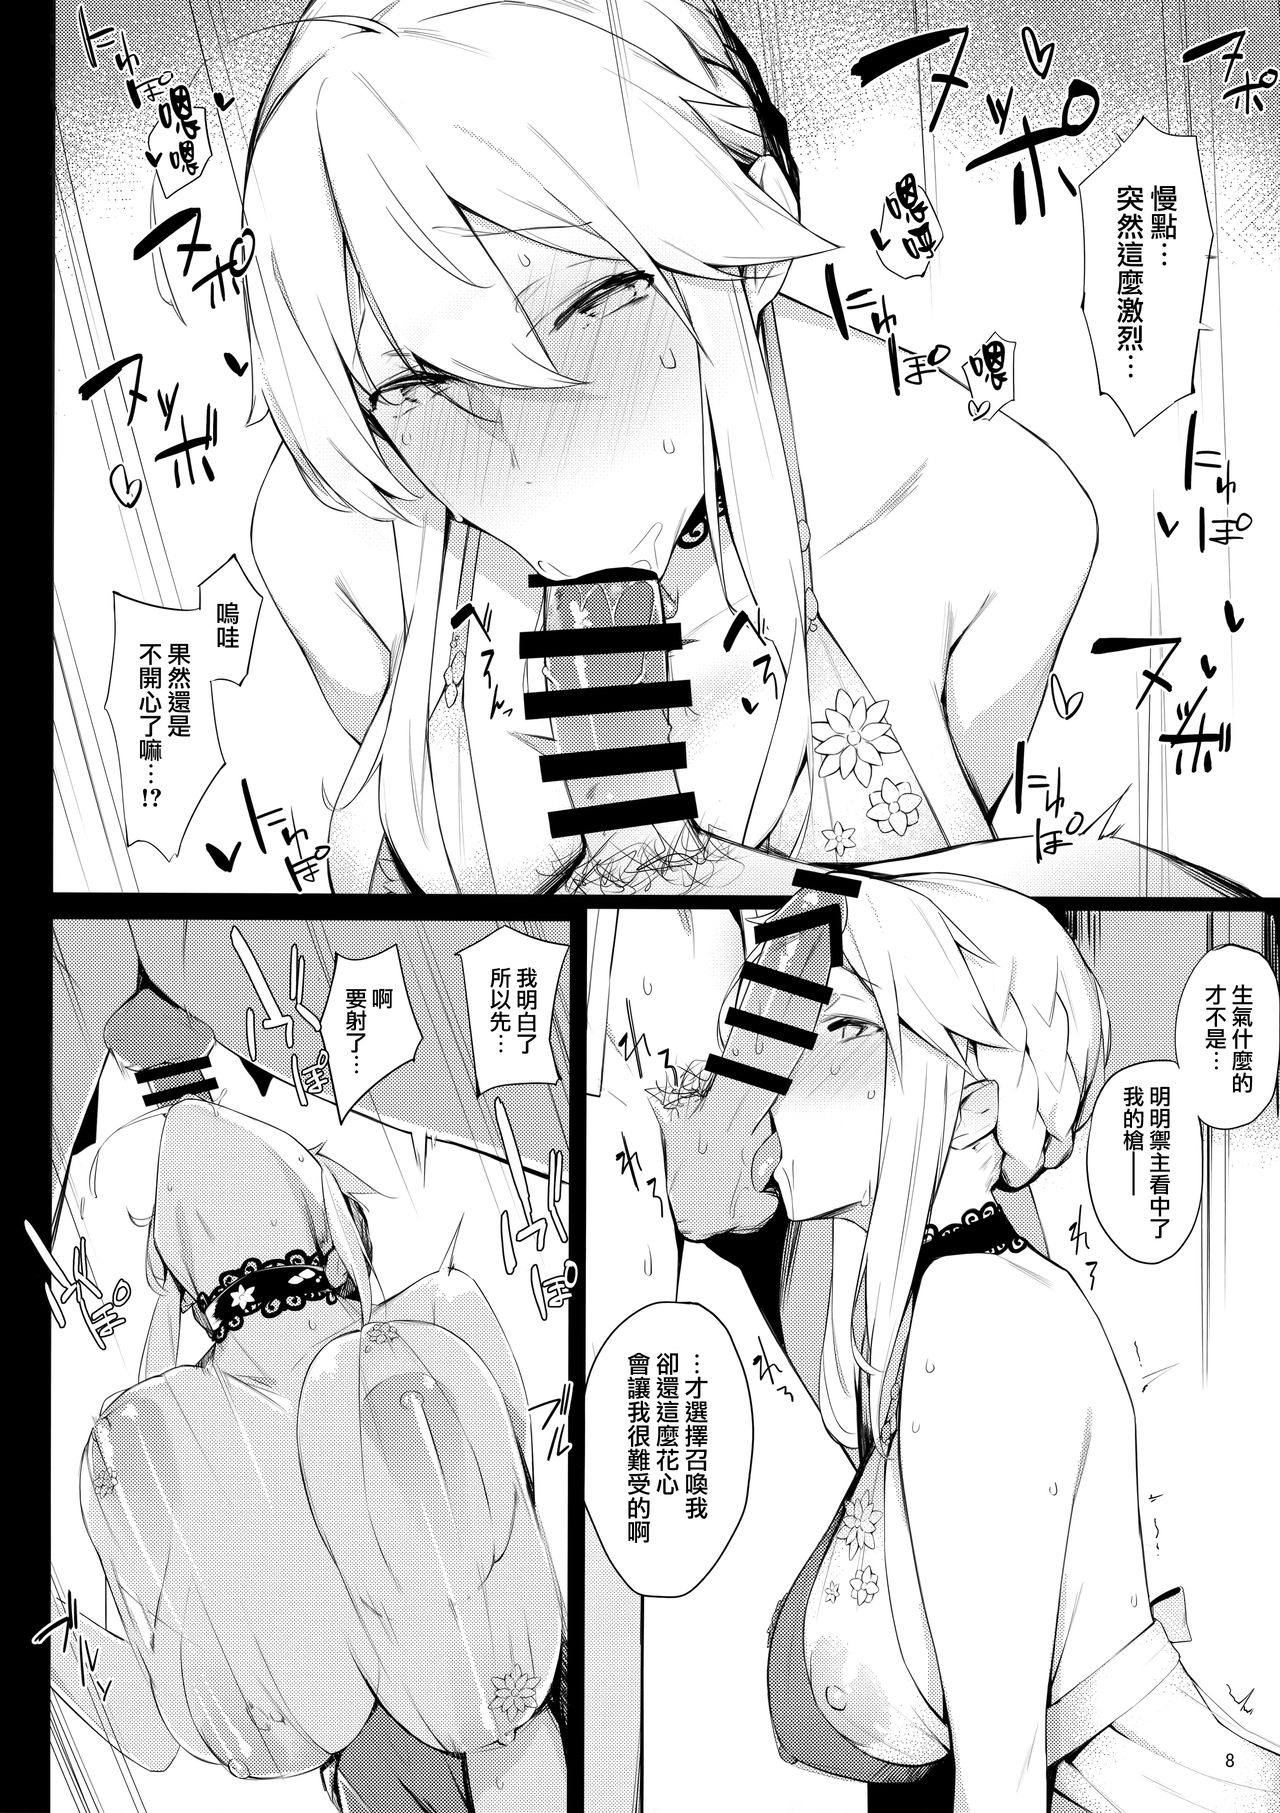 (C95) [Enokiya (eno)] Sultry Altria (Fate/Grand Order) [Chinese] [无毒汉化组] page 8 full